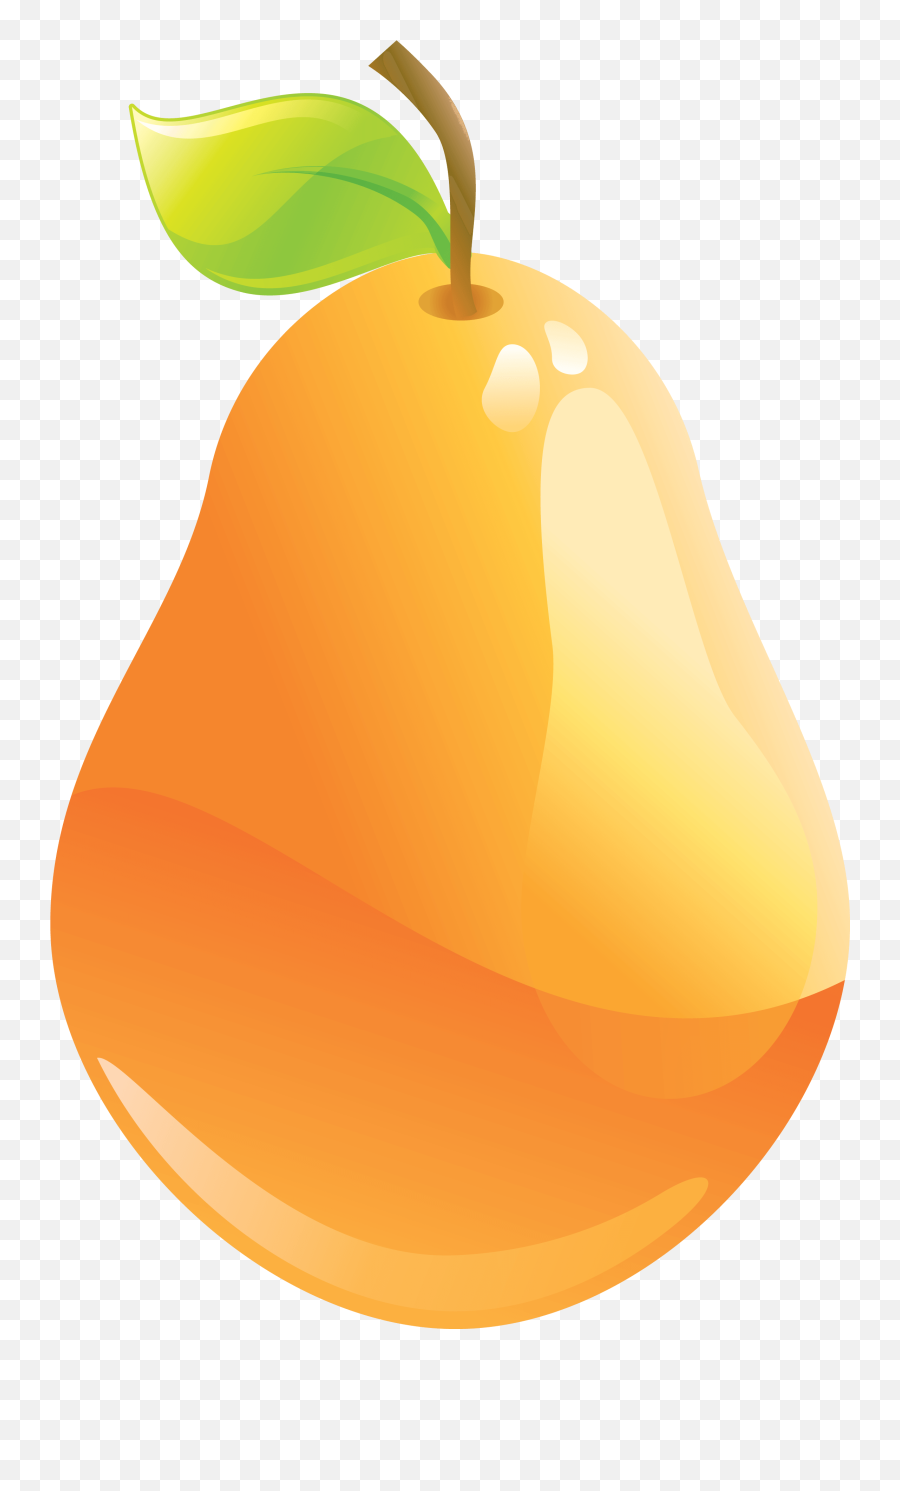 Download Free Yellow Pear Png Image Icon Favicon - Cartoon Fruit And Vegetables Emoji,Pear Emoji